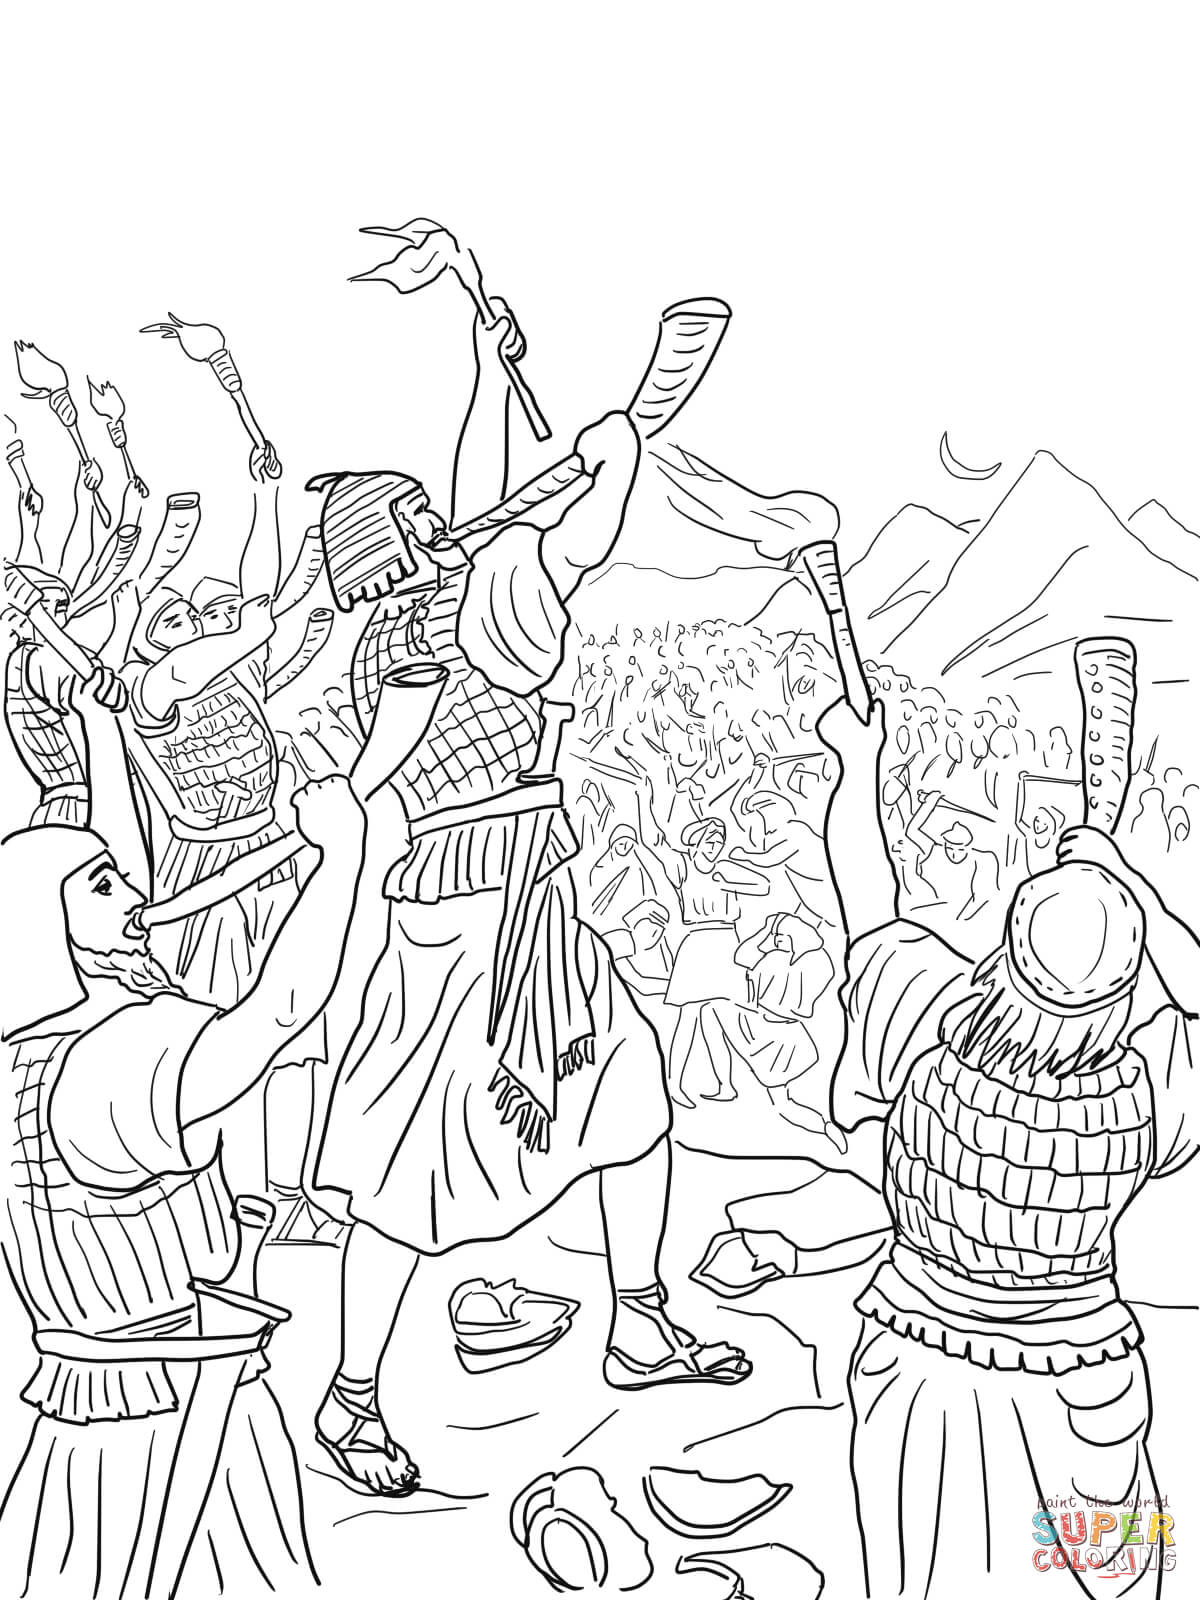 Judge Gideon coloring pages | Free Coloring Pages